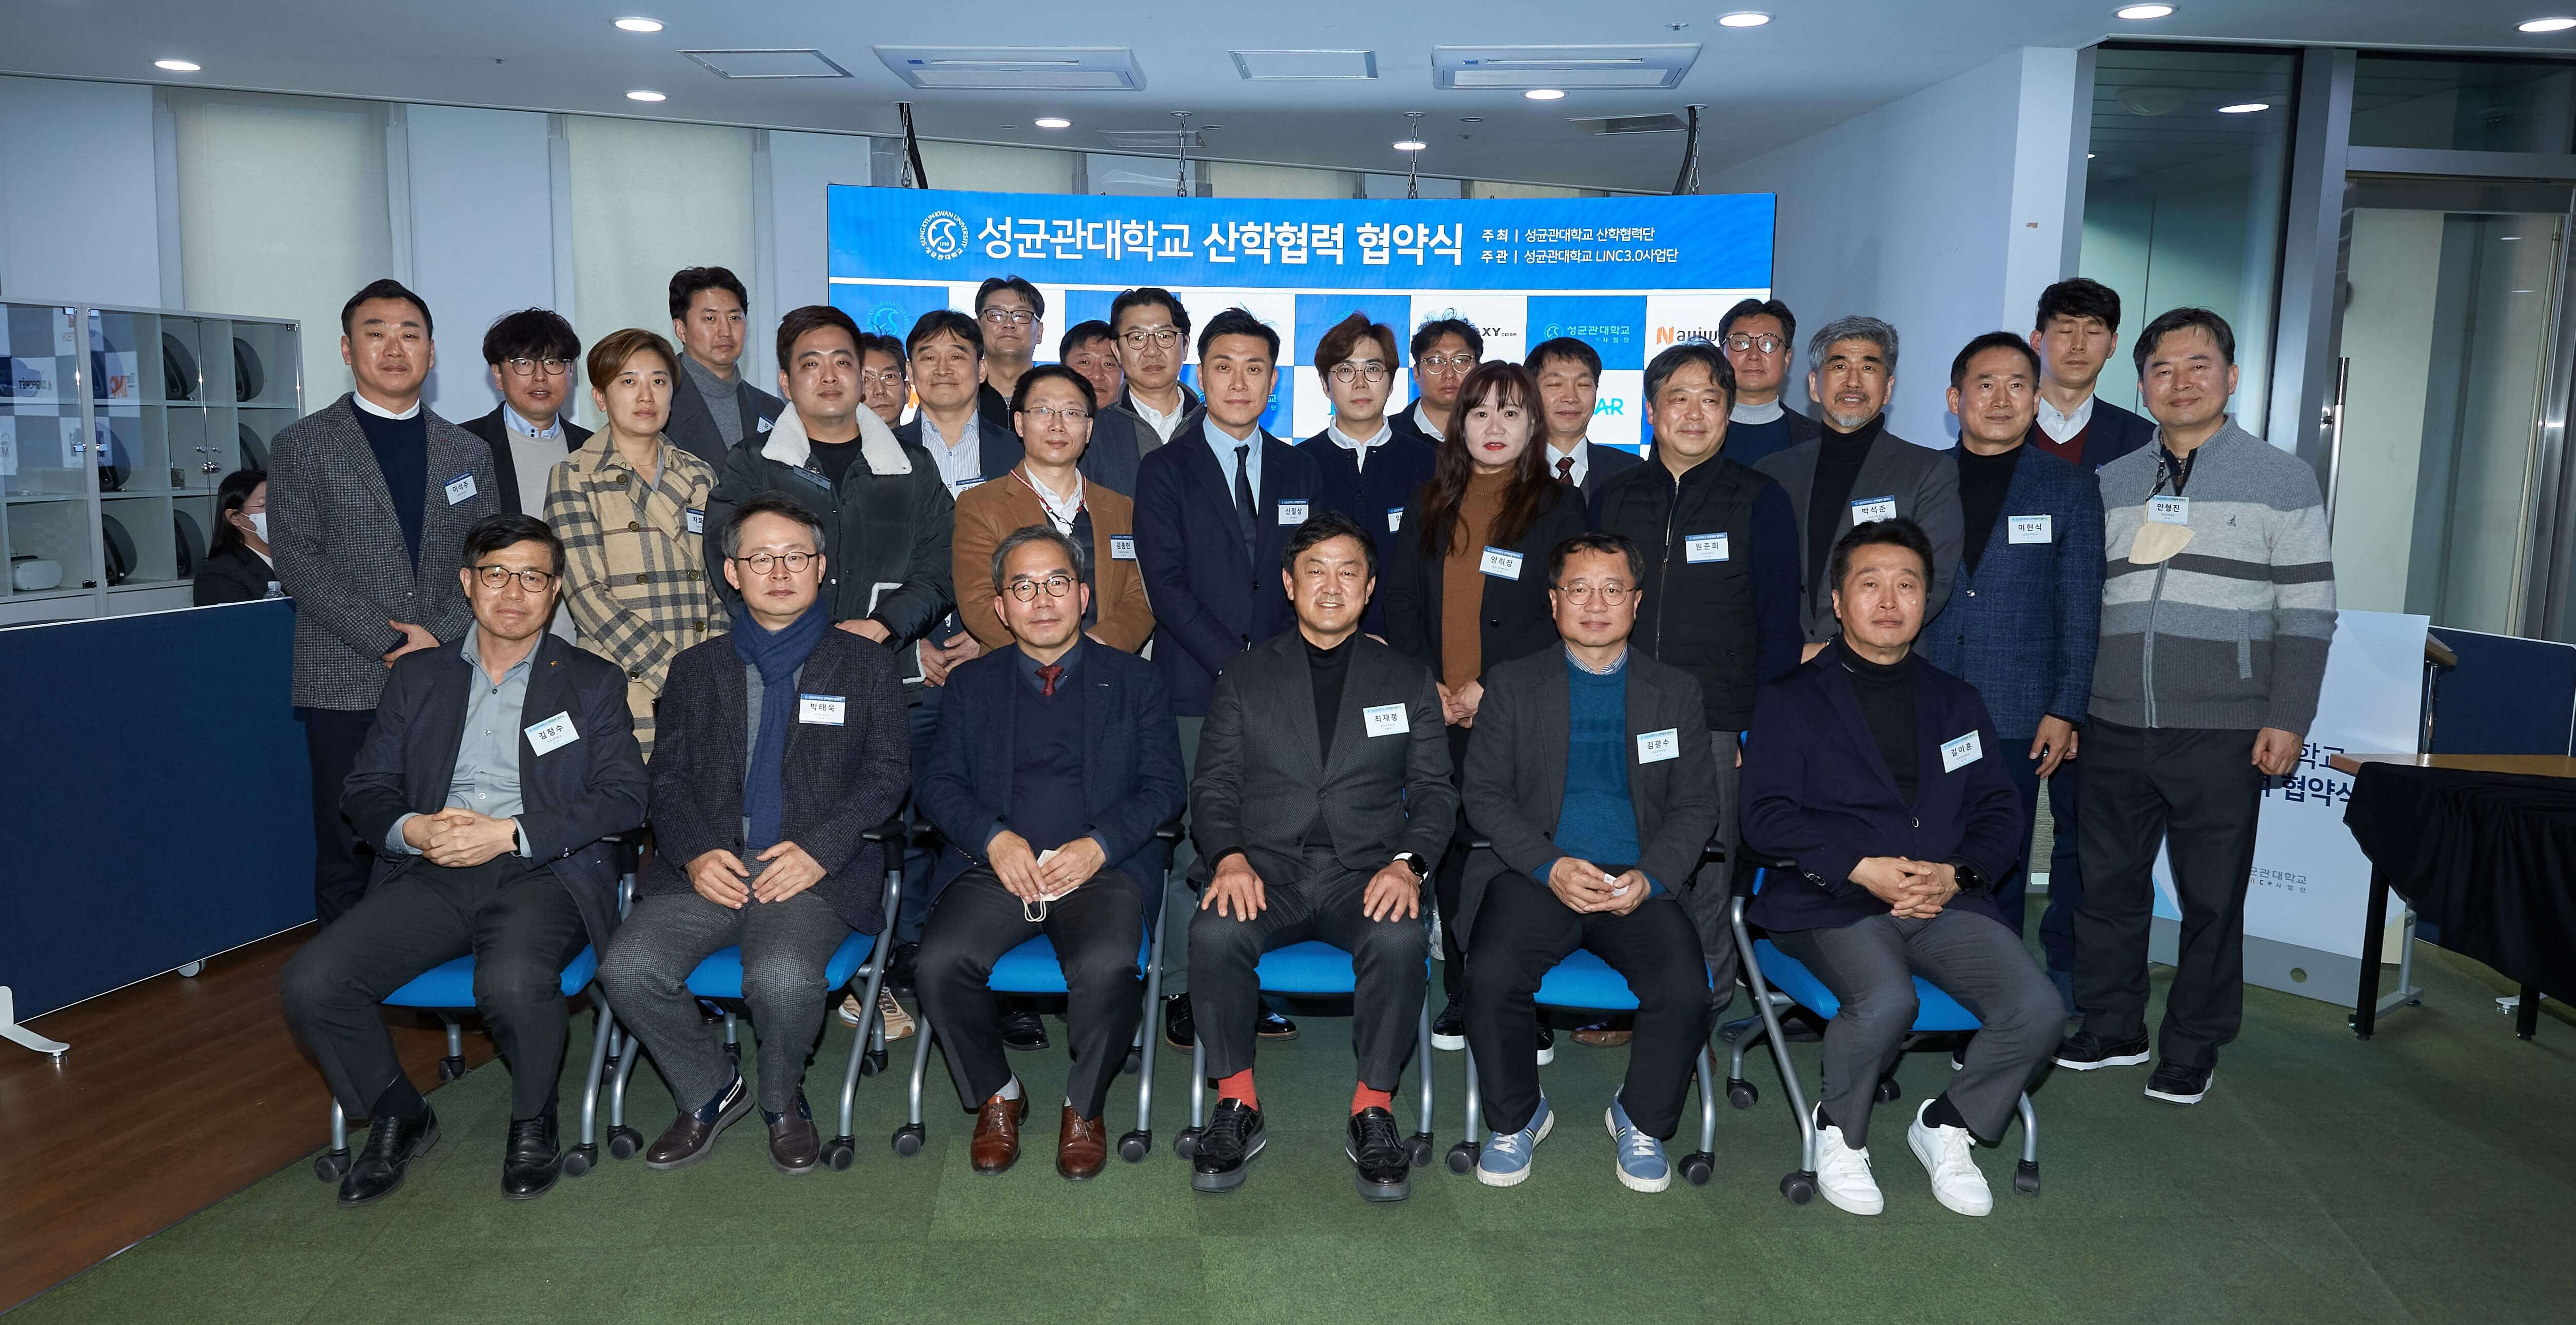 Leadpoint System Signs Industry-Academic Cooperation Agreement at Sungkyunkwan University